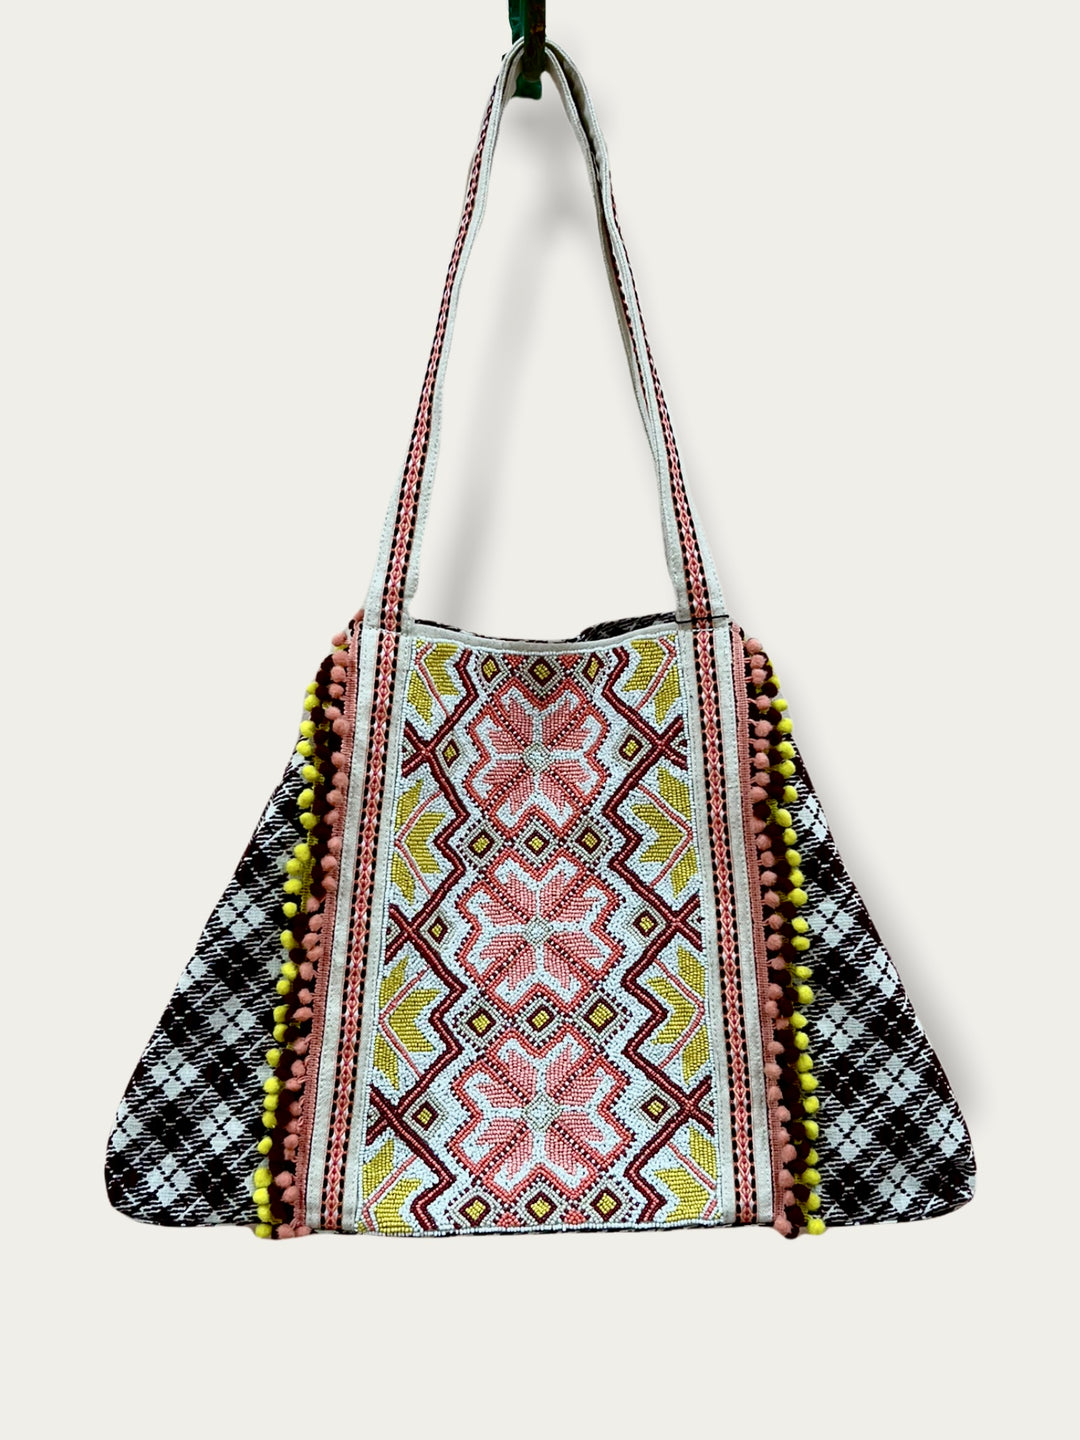 EMBELLISHED TOTE-FAIR ISLE - Kingfisher Road - Online Boutique